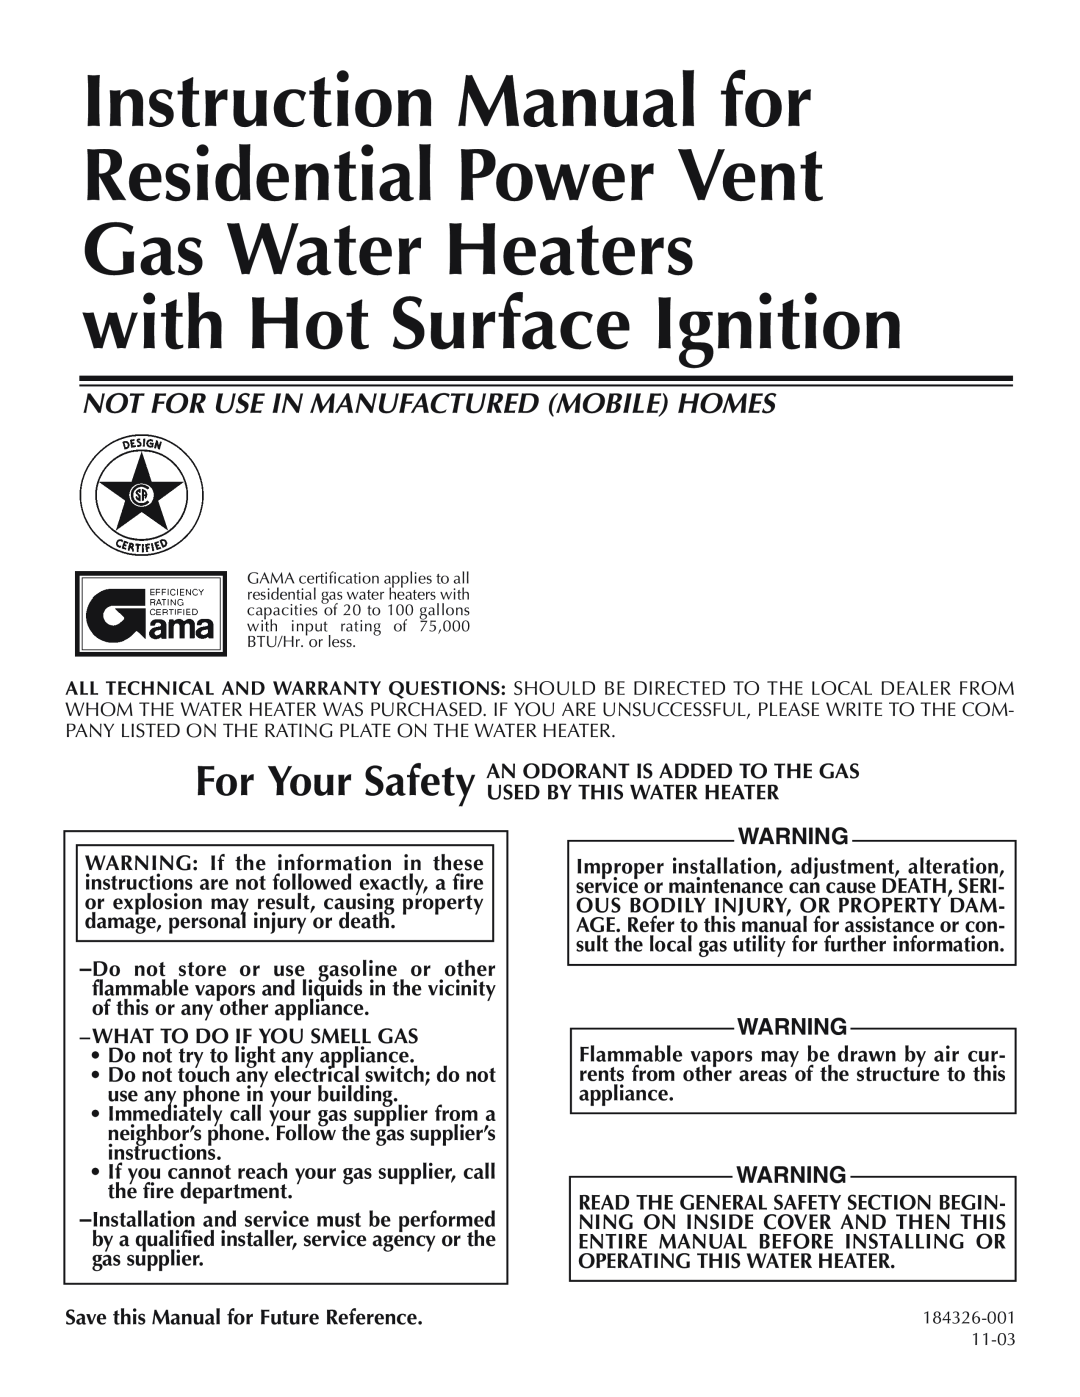 A.O. Smith Residential Power Vent Gas Water Heaters with Hot Surface Ignition instruction manual 